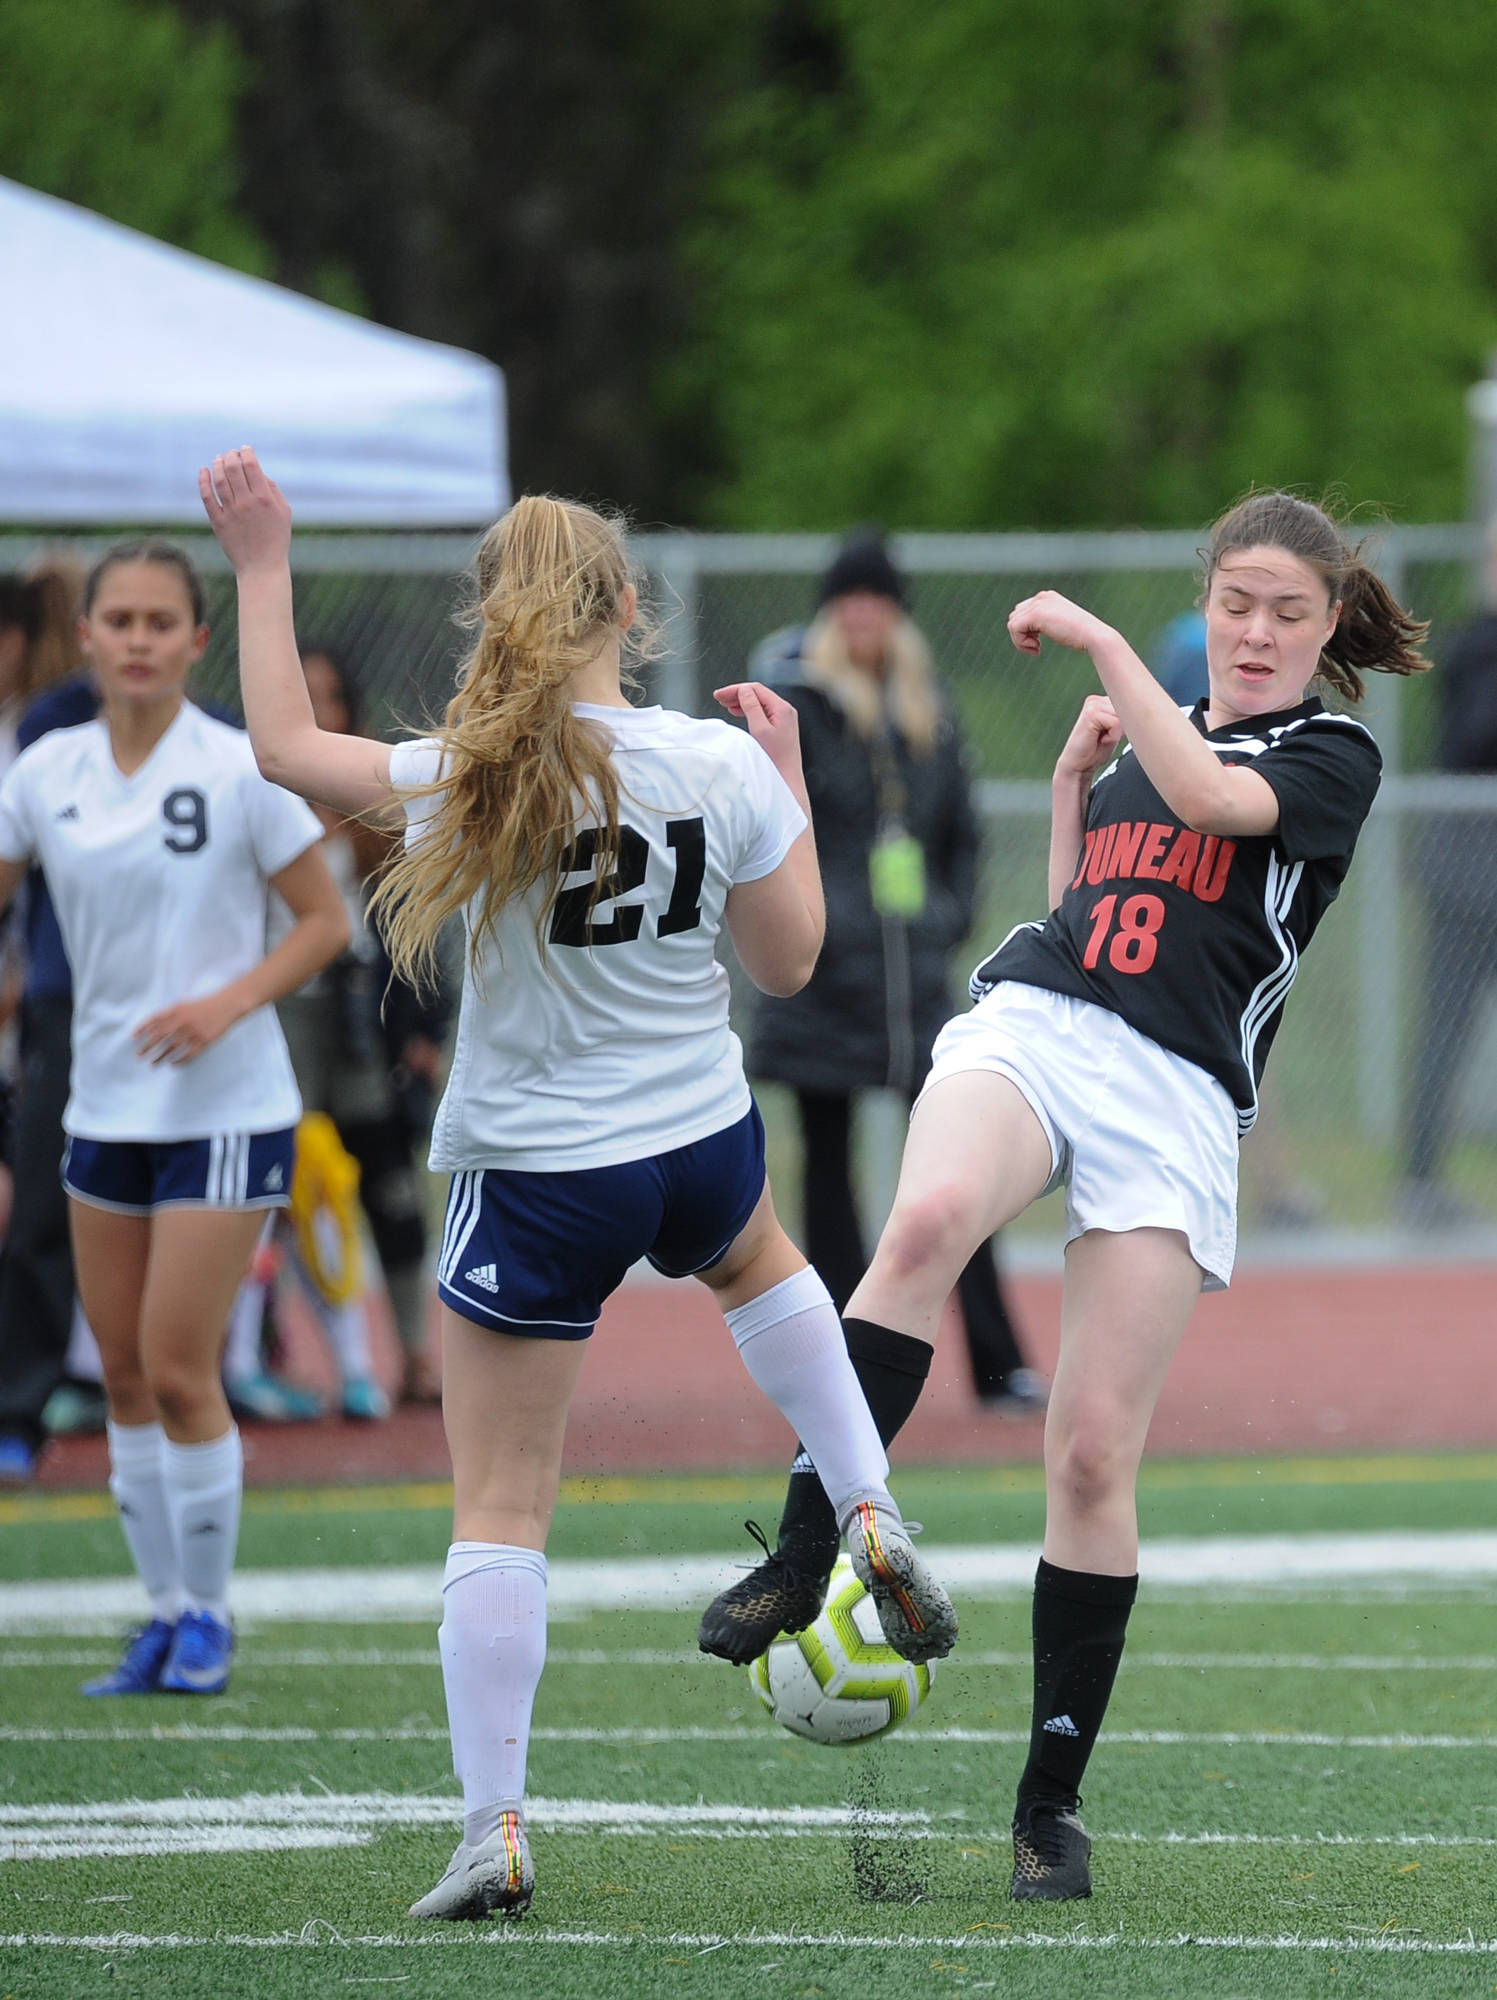 Juneau-Douglas’ Jasmin Holst and Soldotna’s Jolie Widiman battle over the ball in the second half of JDHS’ 5-1 win in over Soldotna in the the ASAA/First National Bank Alaska soccer state championship match Saturday afternoon at Service High School in Anchorage. (Michael Dinneen | For the Juneau Empire)